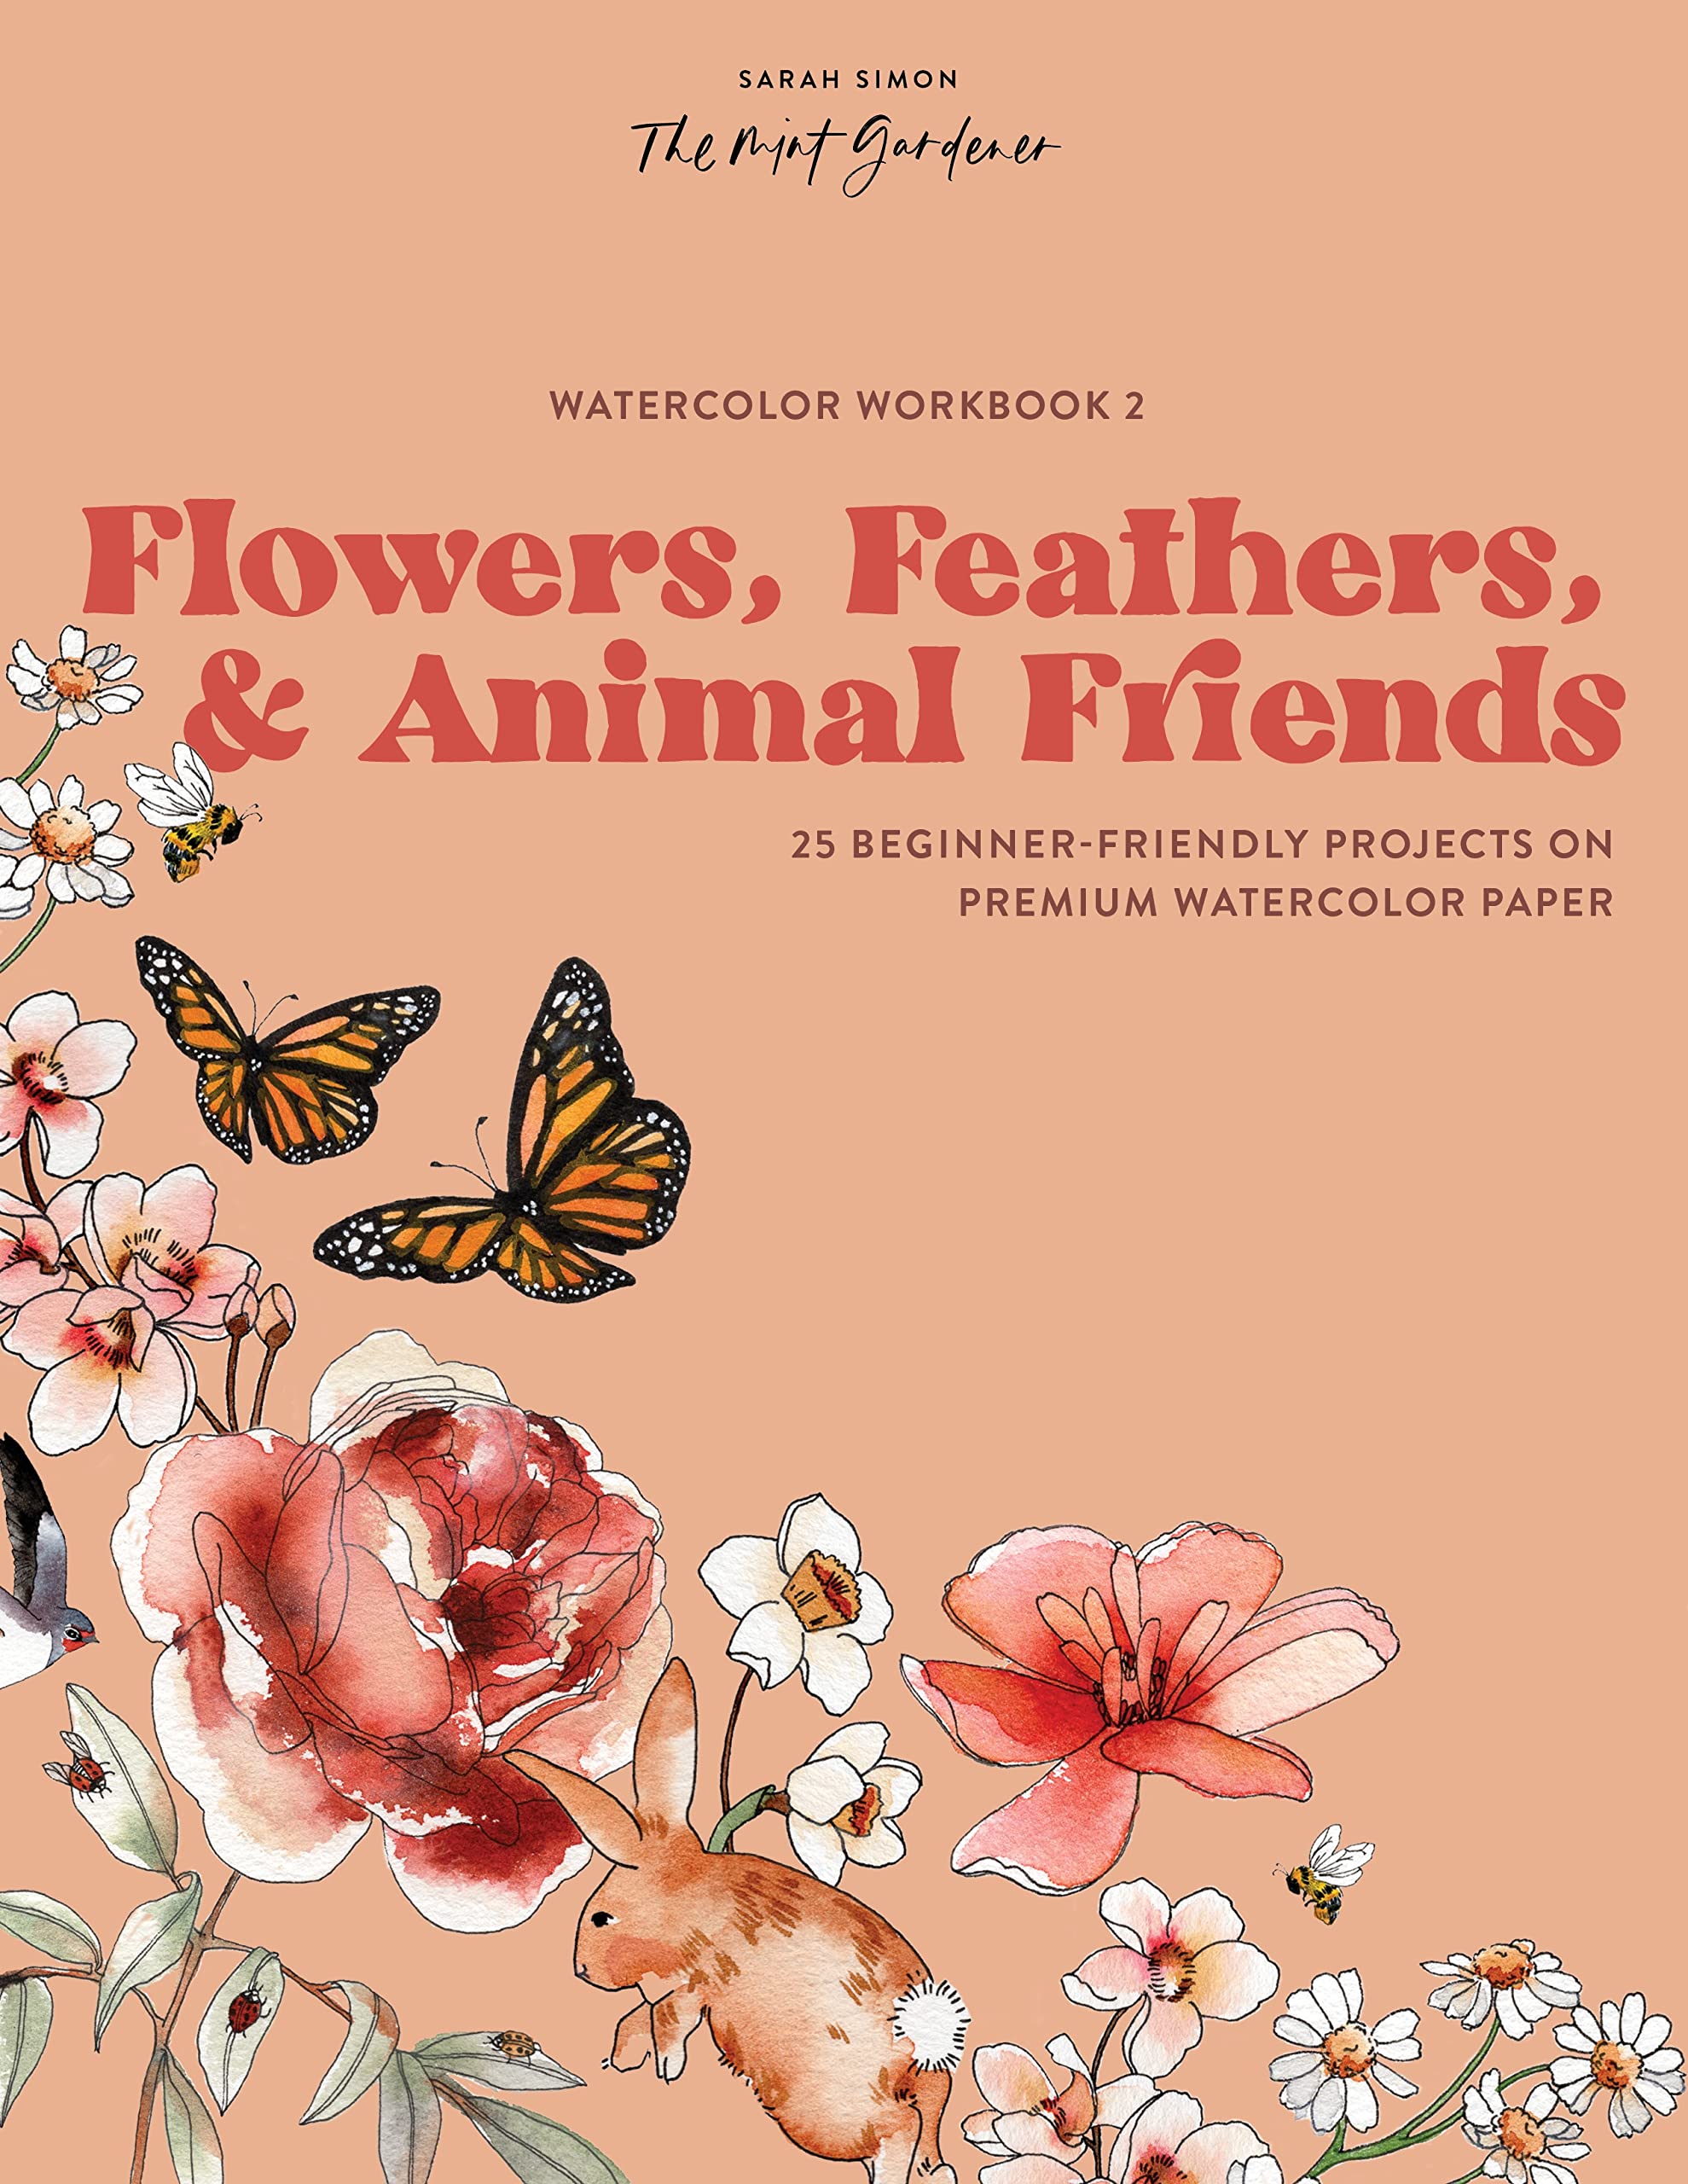 Watercolor Workbook: Flowers, Feathers, and Animal Friends: 25 Beginner-Friendly Projects on Premium Watercolor Paper by Simon, Sarah